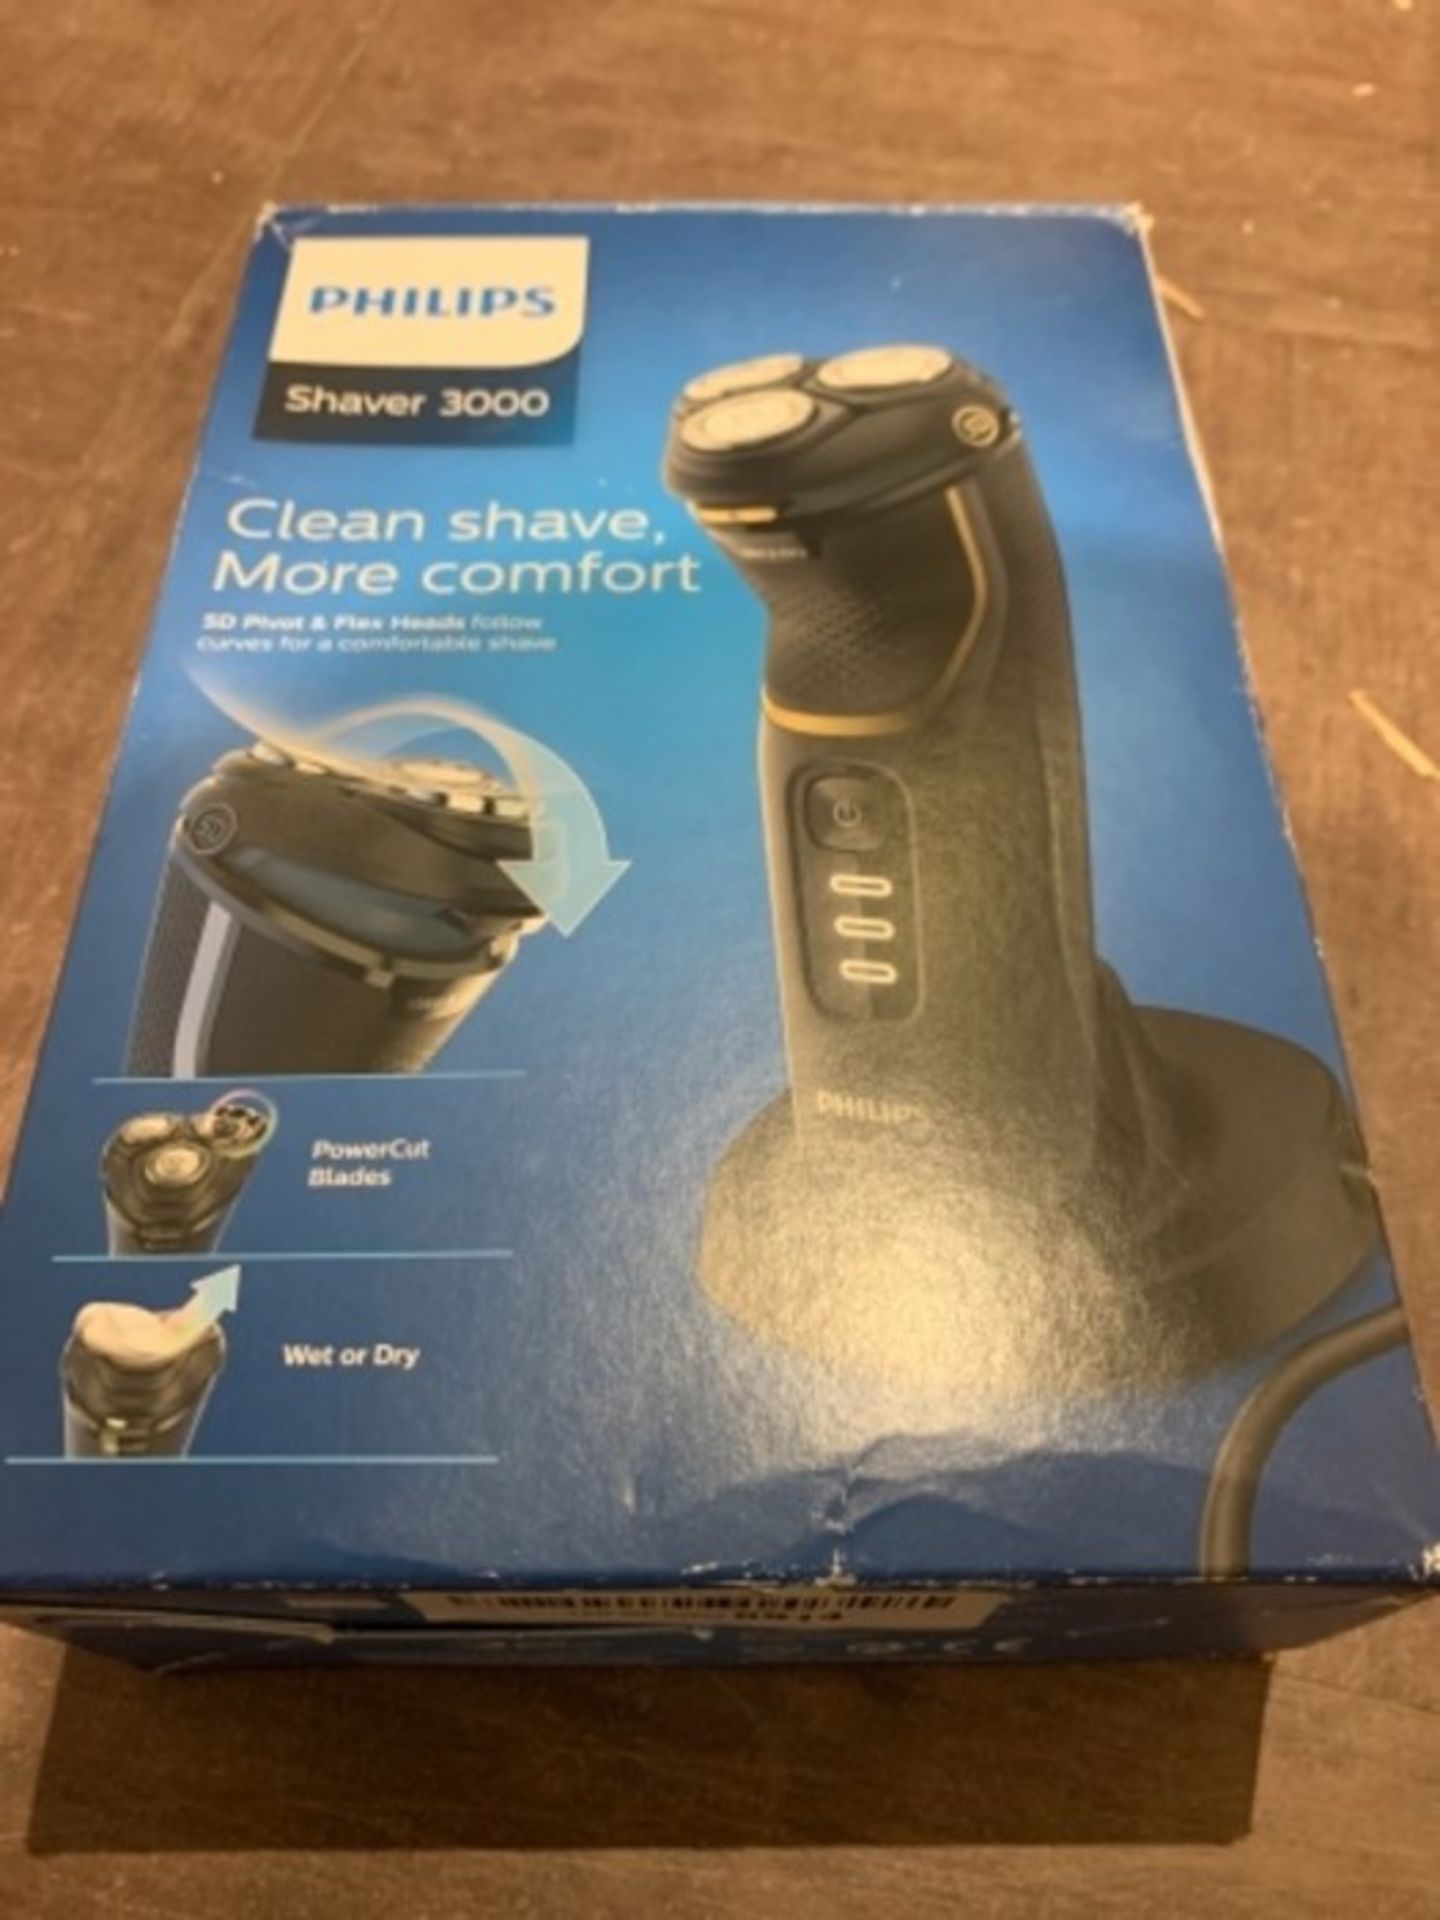 RRP £67.00 Philips Shaver Series 3000 with Powercut Blades, Wet & Dry Men's Electric Shaver with - Image 2 of 3